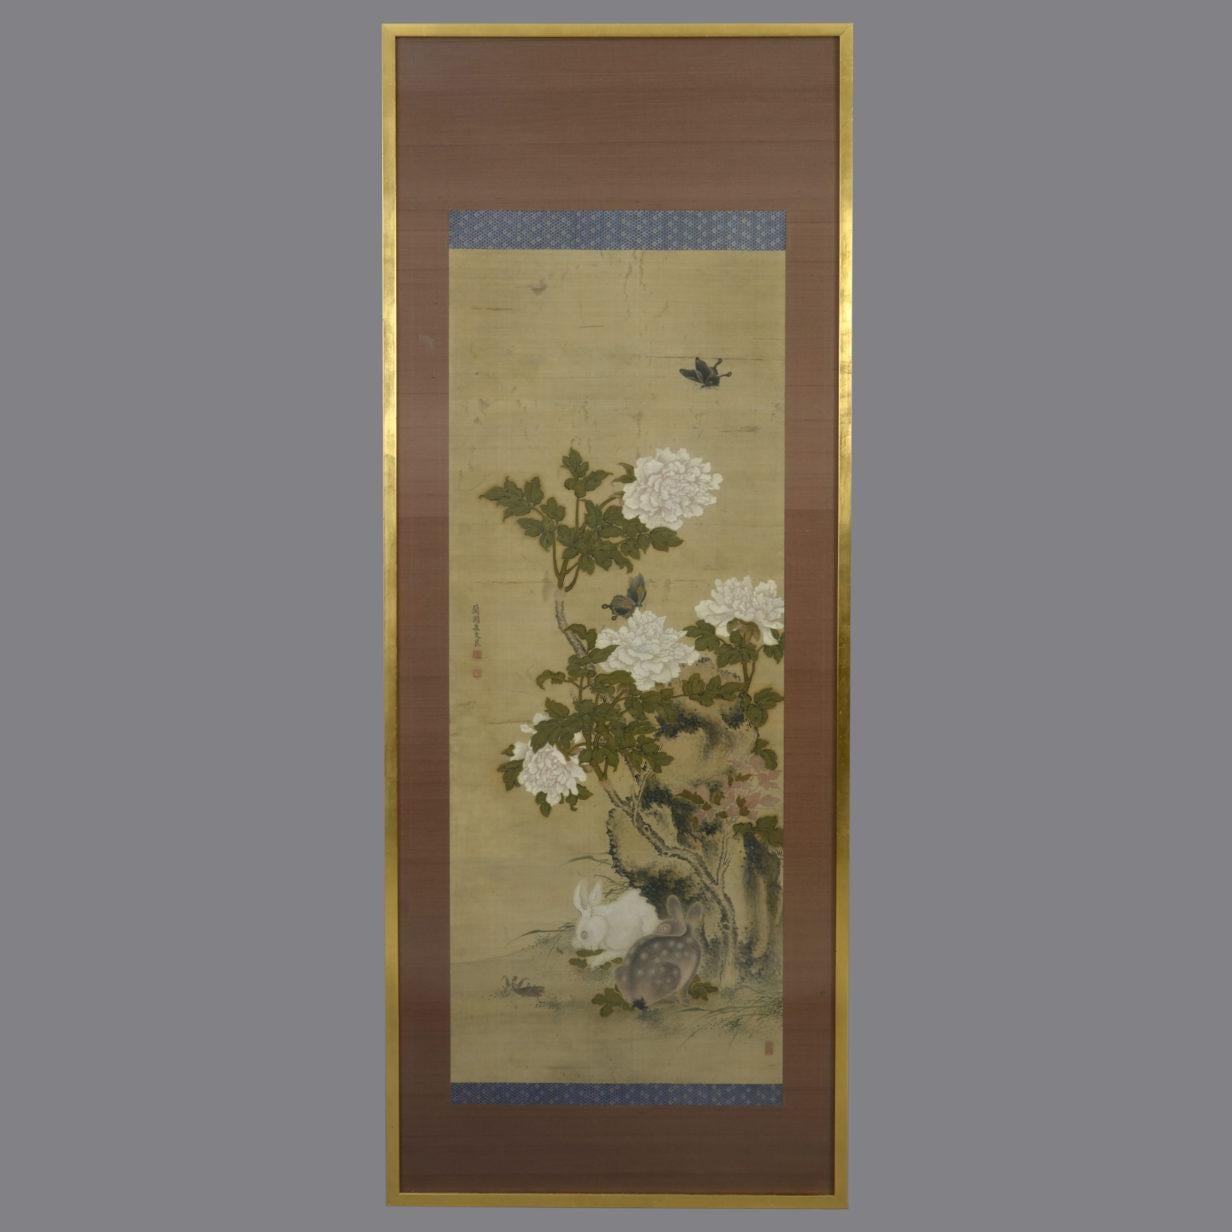 Unknown Landscape Painting - Large 19th Century Silk Scrollwork Painting